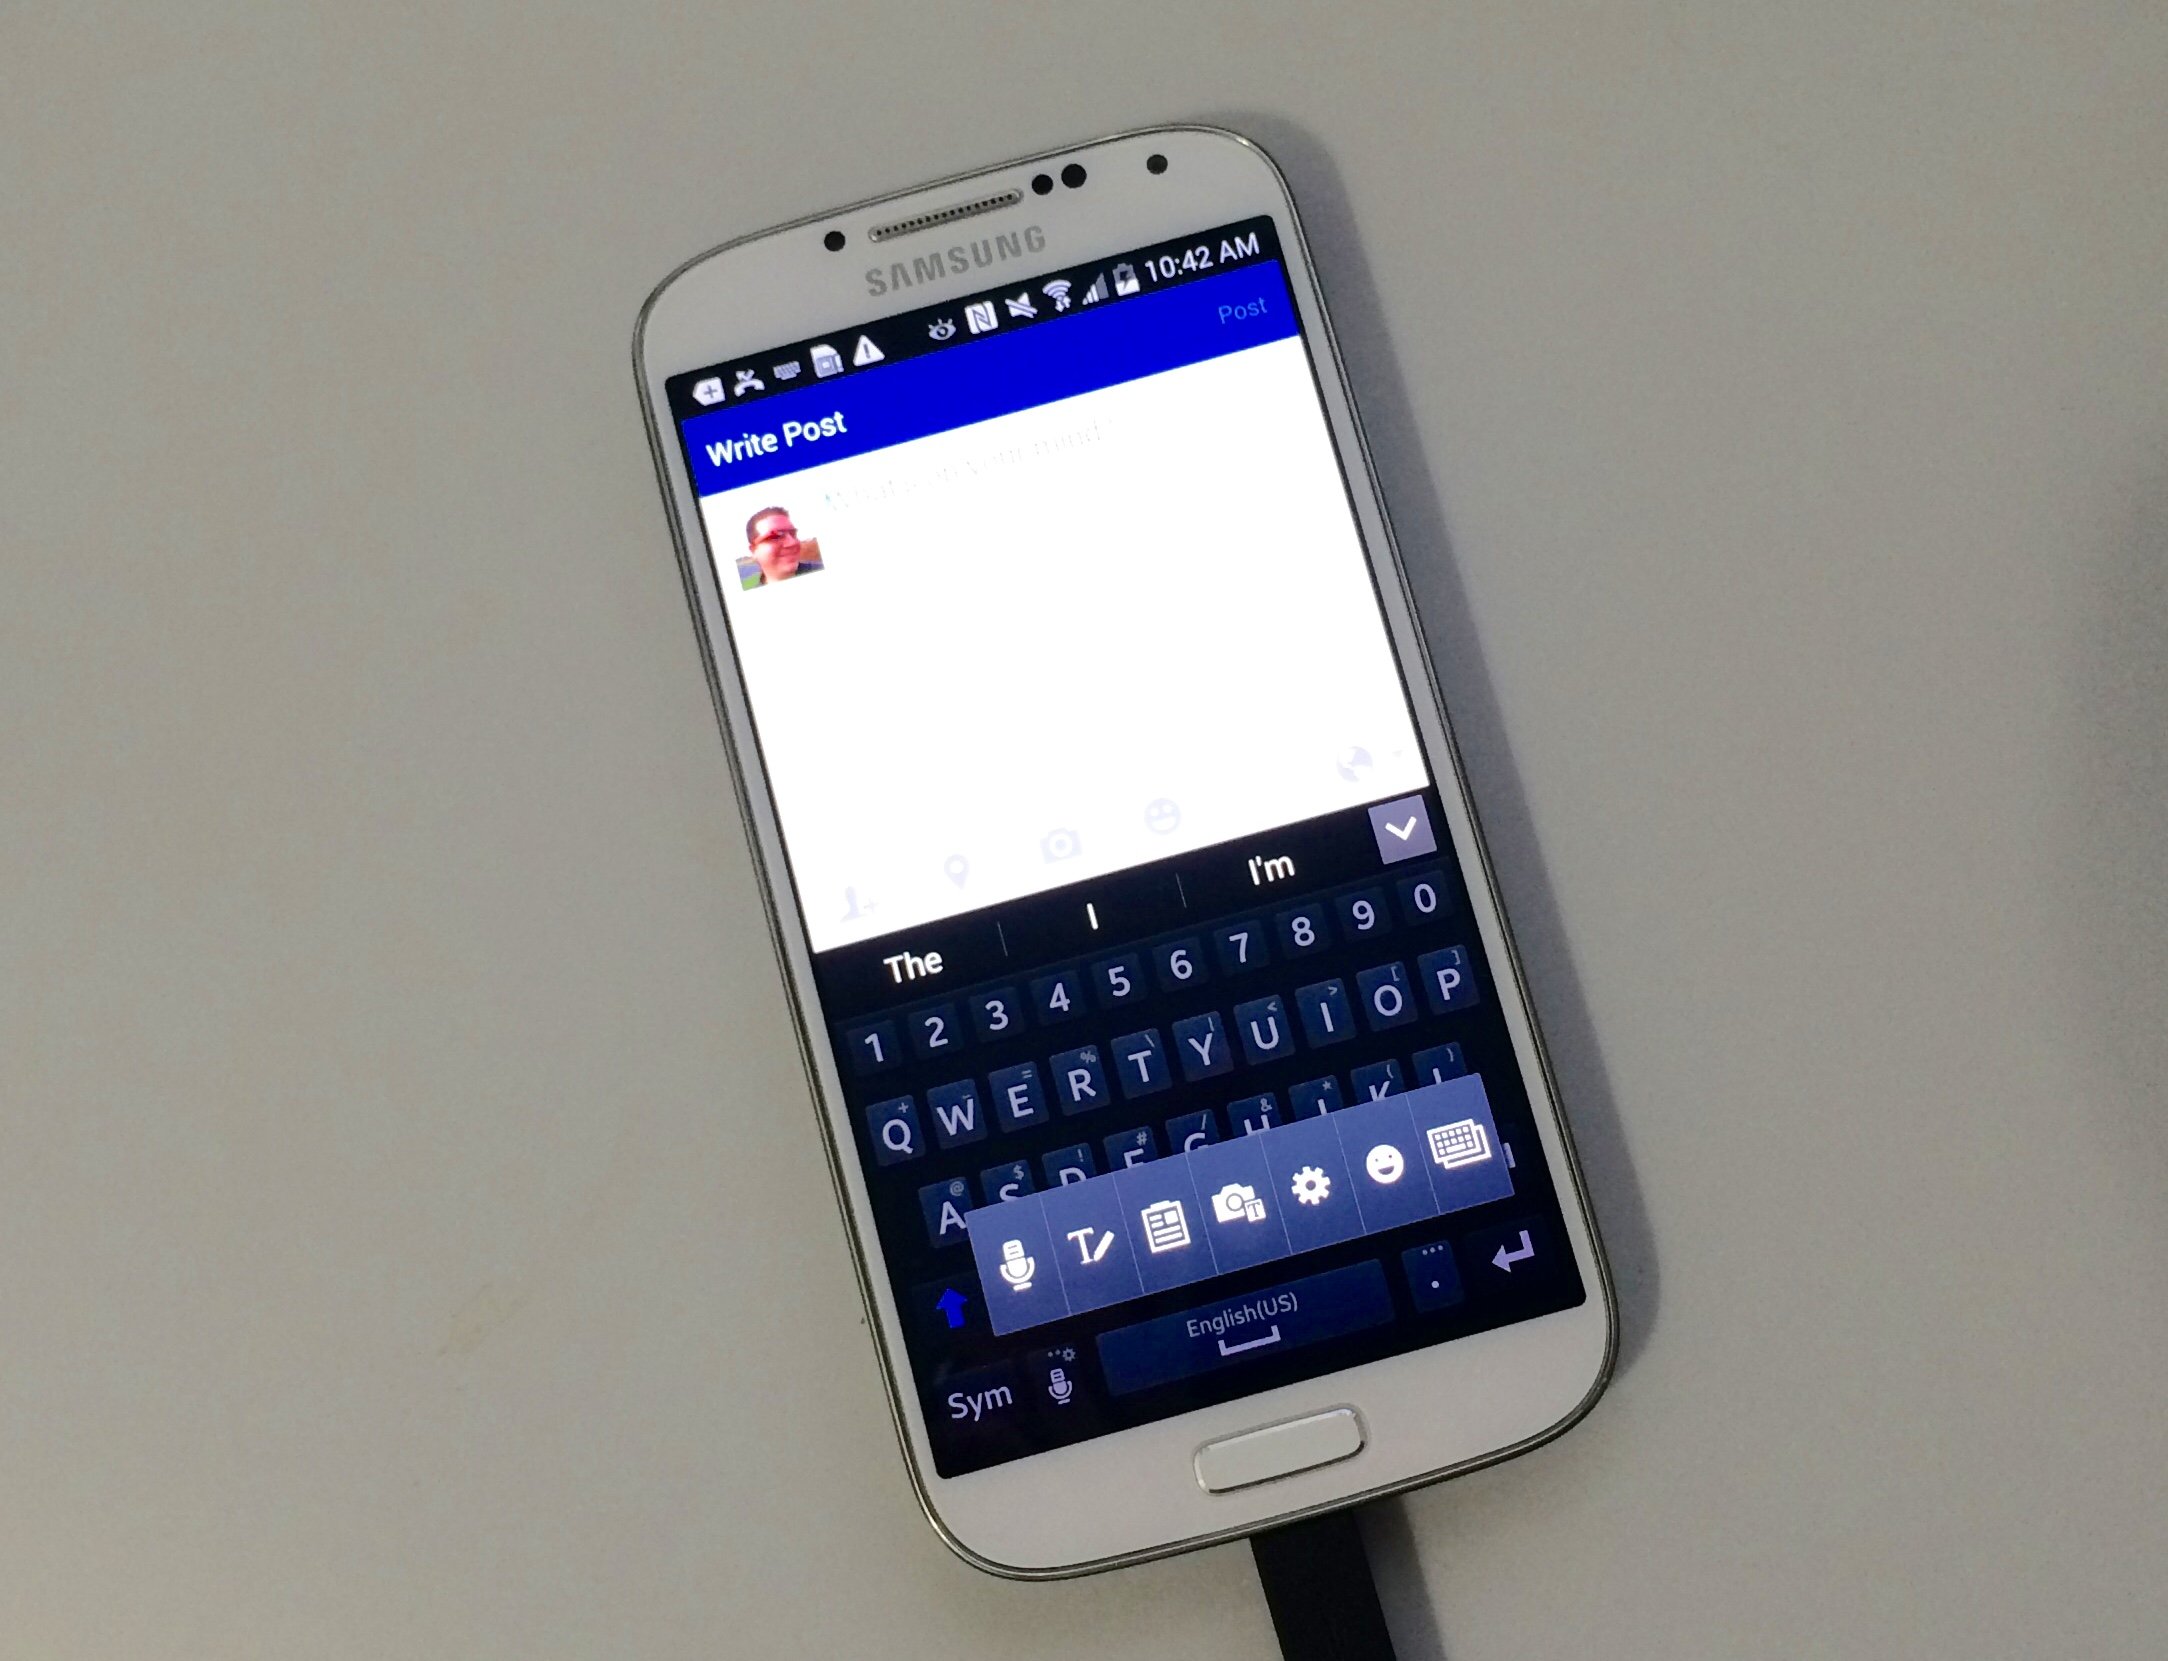 The Galaxy S4 Emoji keyboard should be easy to access, but it is not working for everyone.